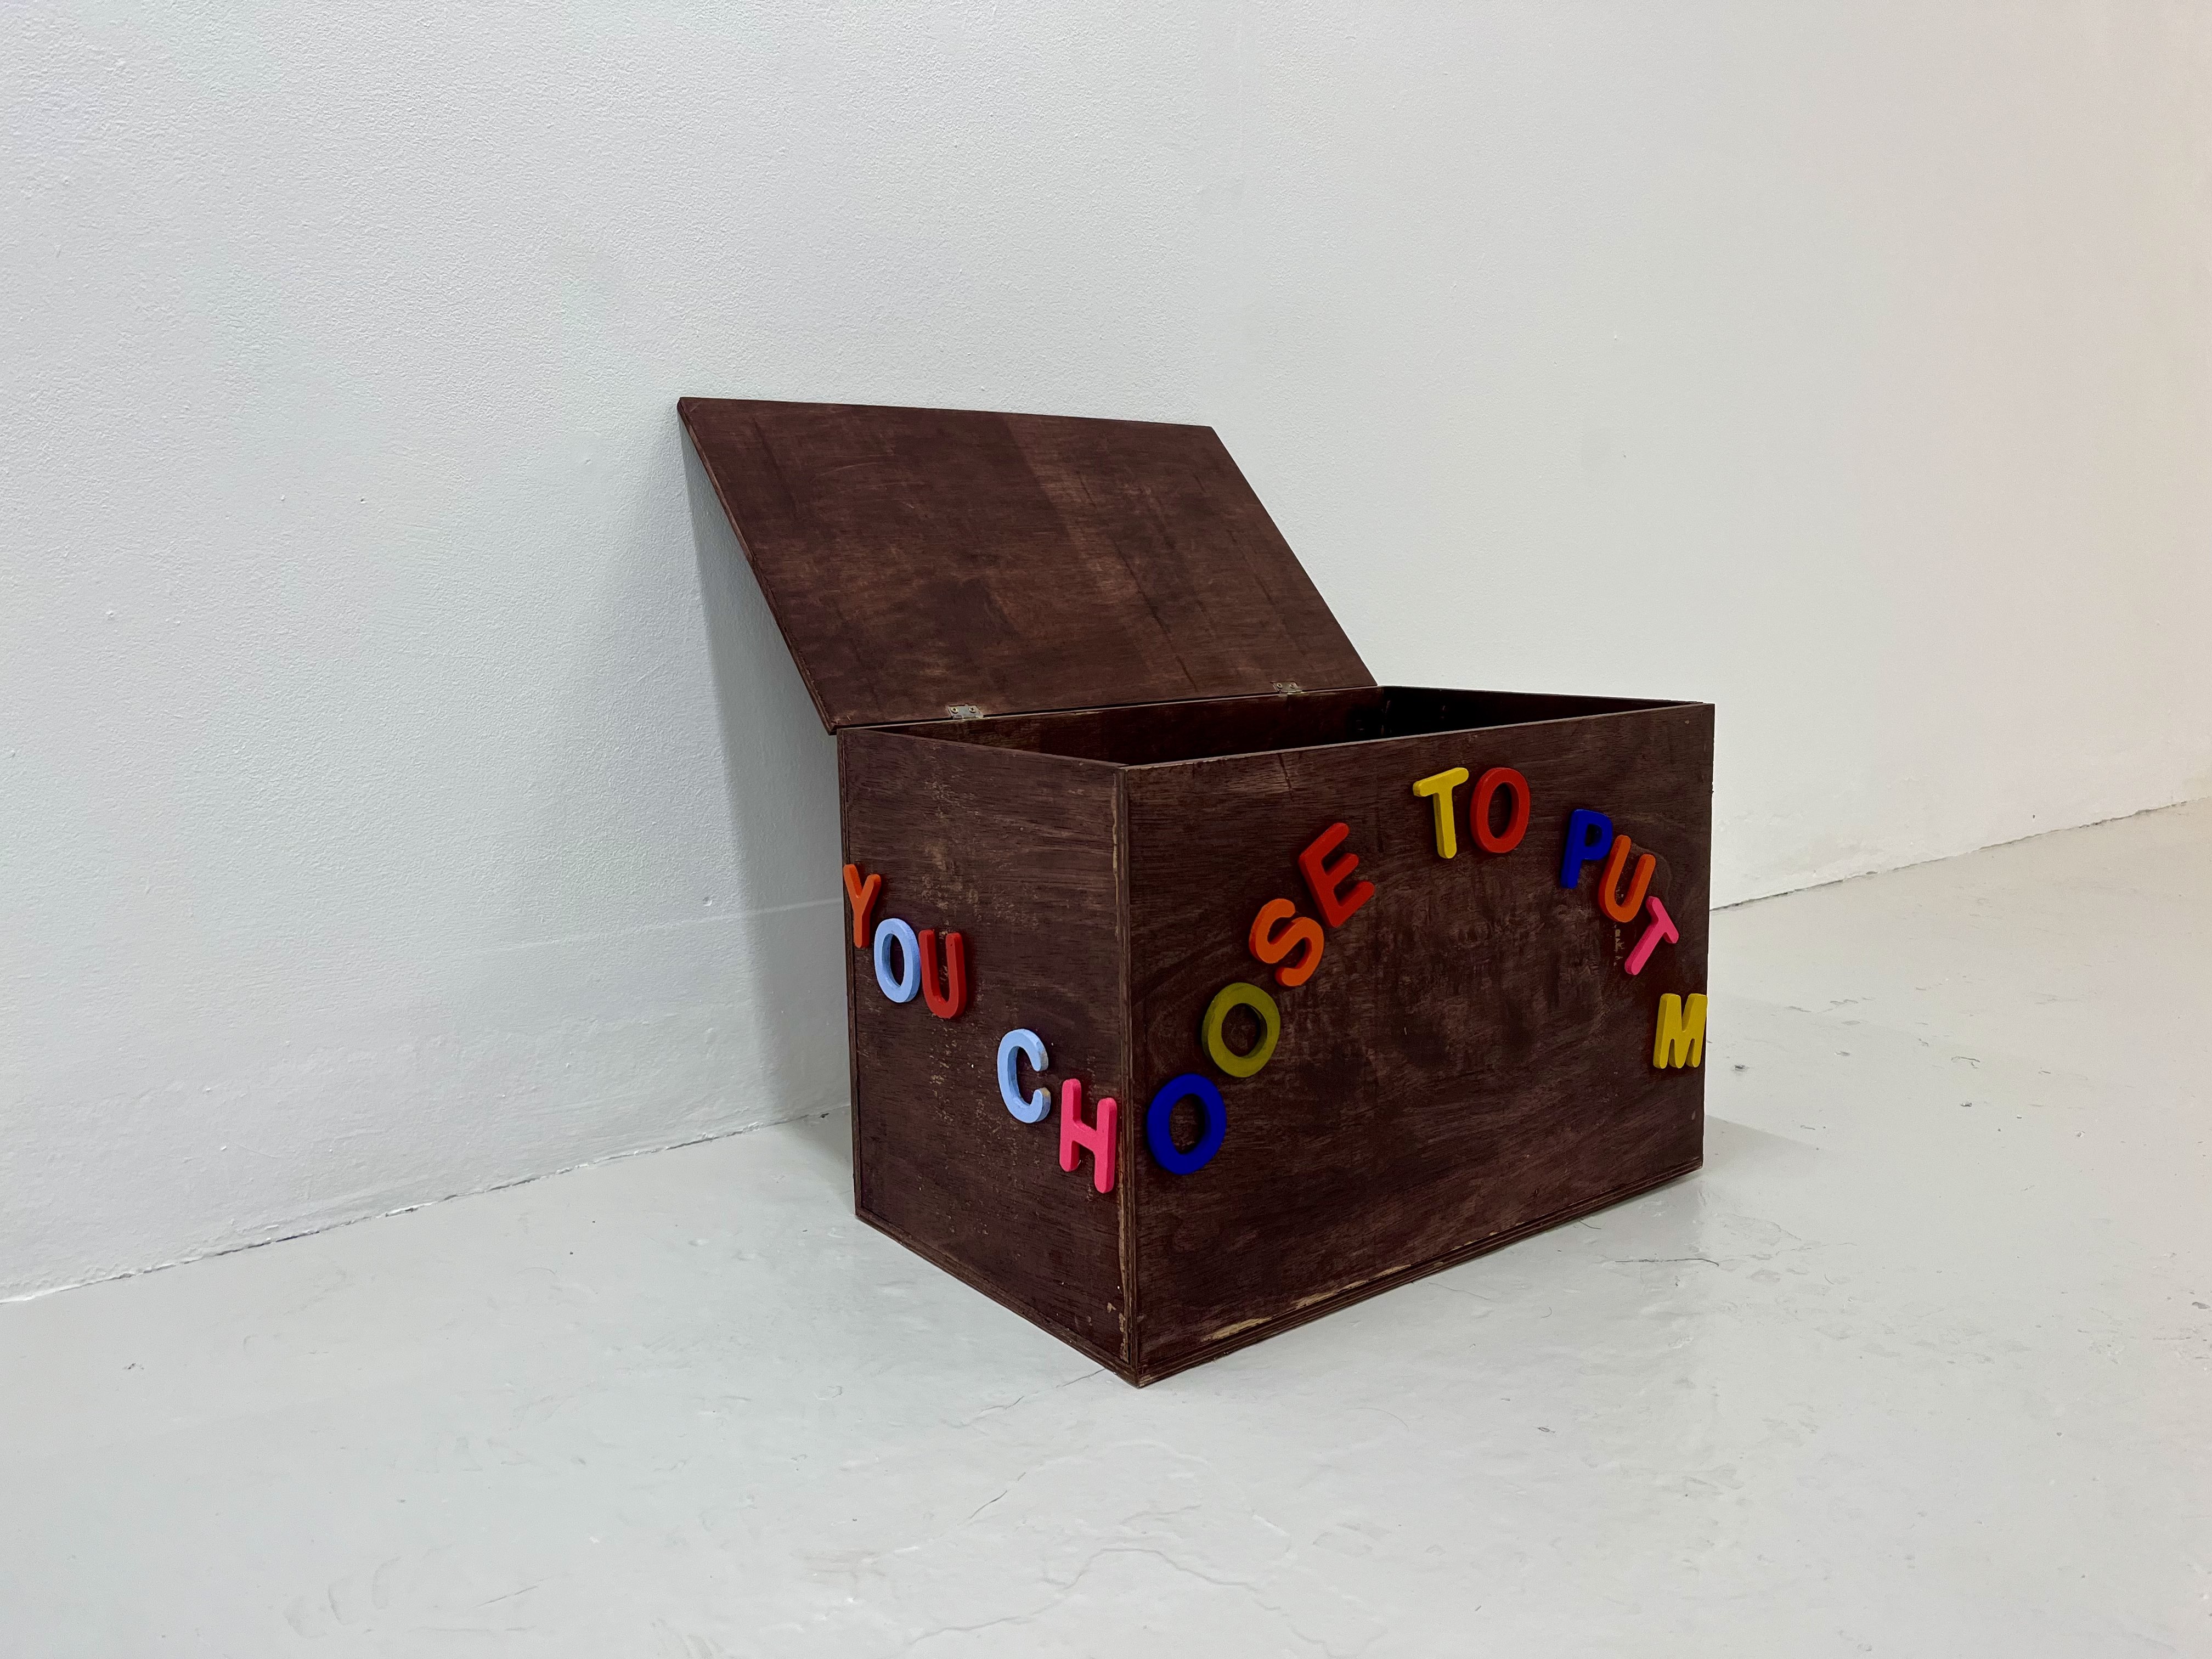 Sculpture by Amber-Rose Thorpe and Georgia Keeling. The sculpture is a wooden box with colourful painted text on and inside it.